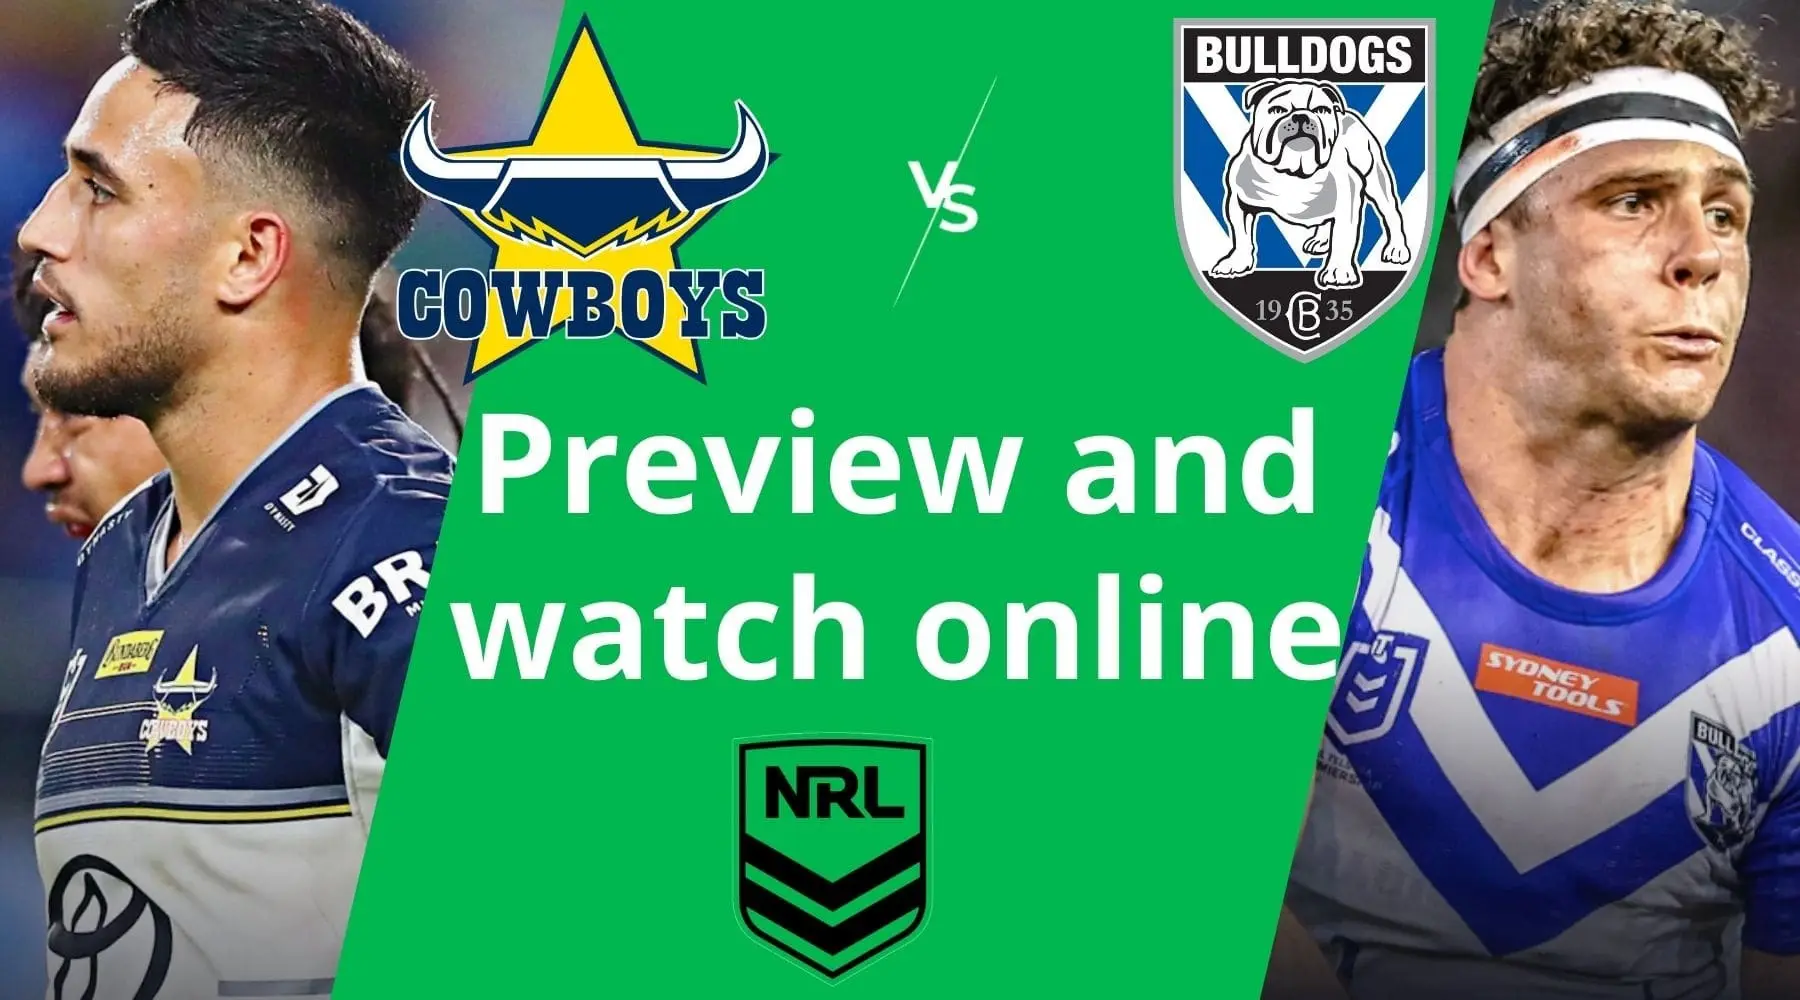 How to watch Cowboys vs Bulldogs NRL live and match preview